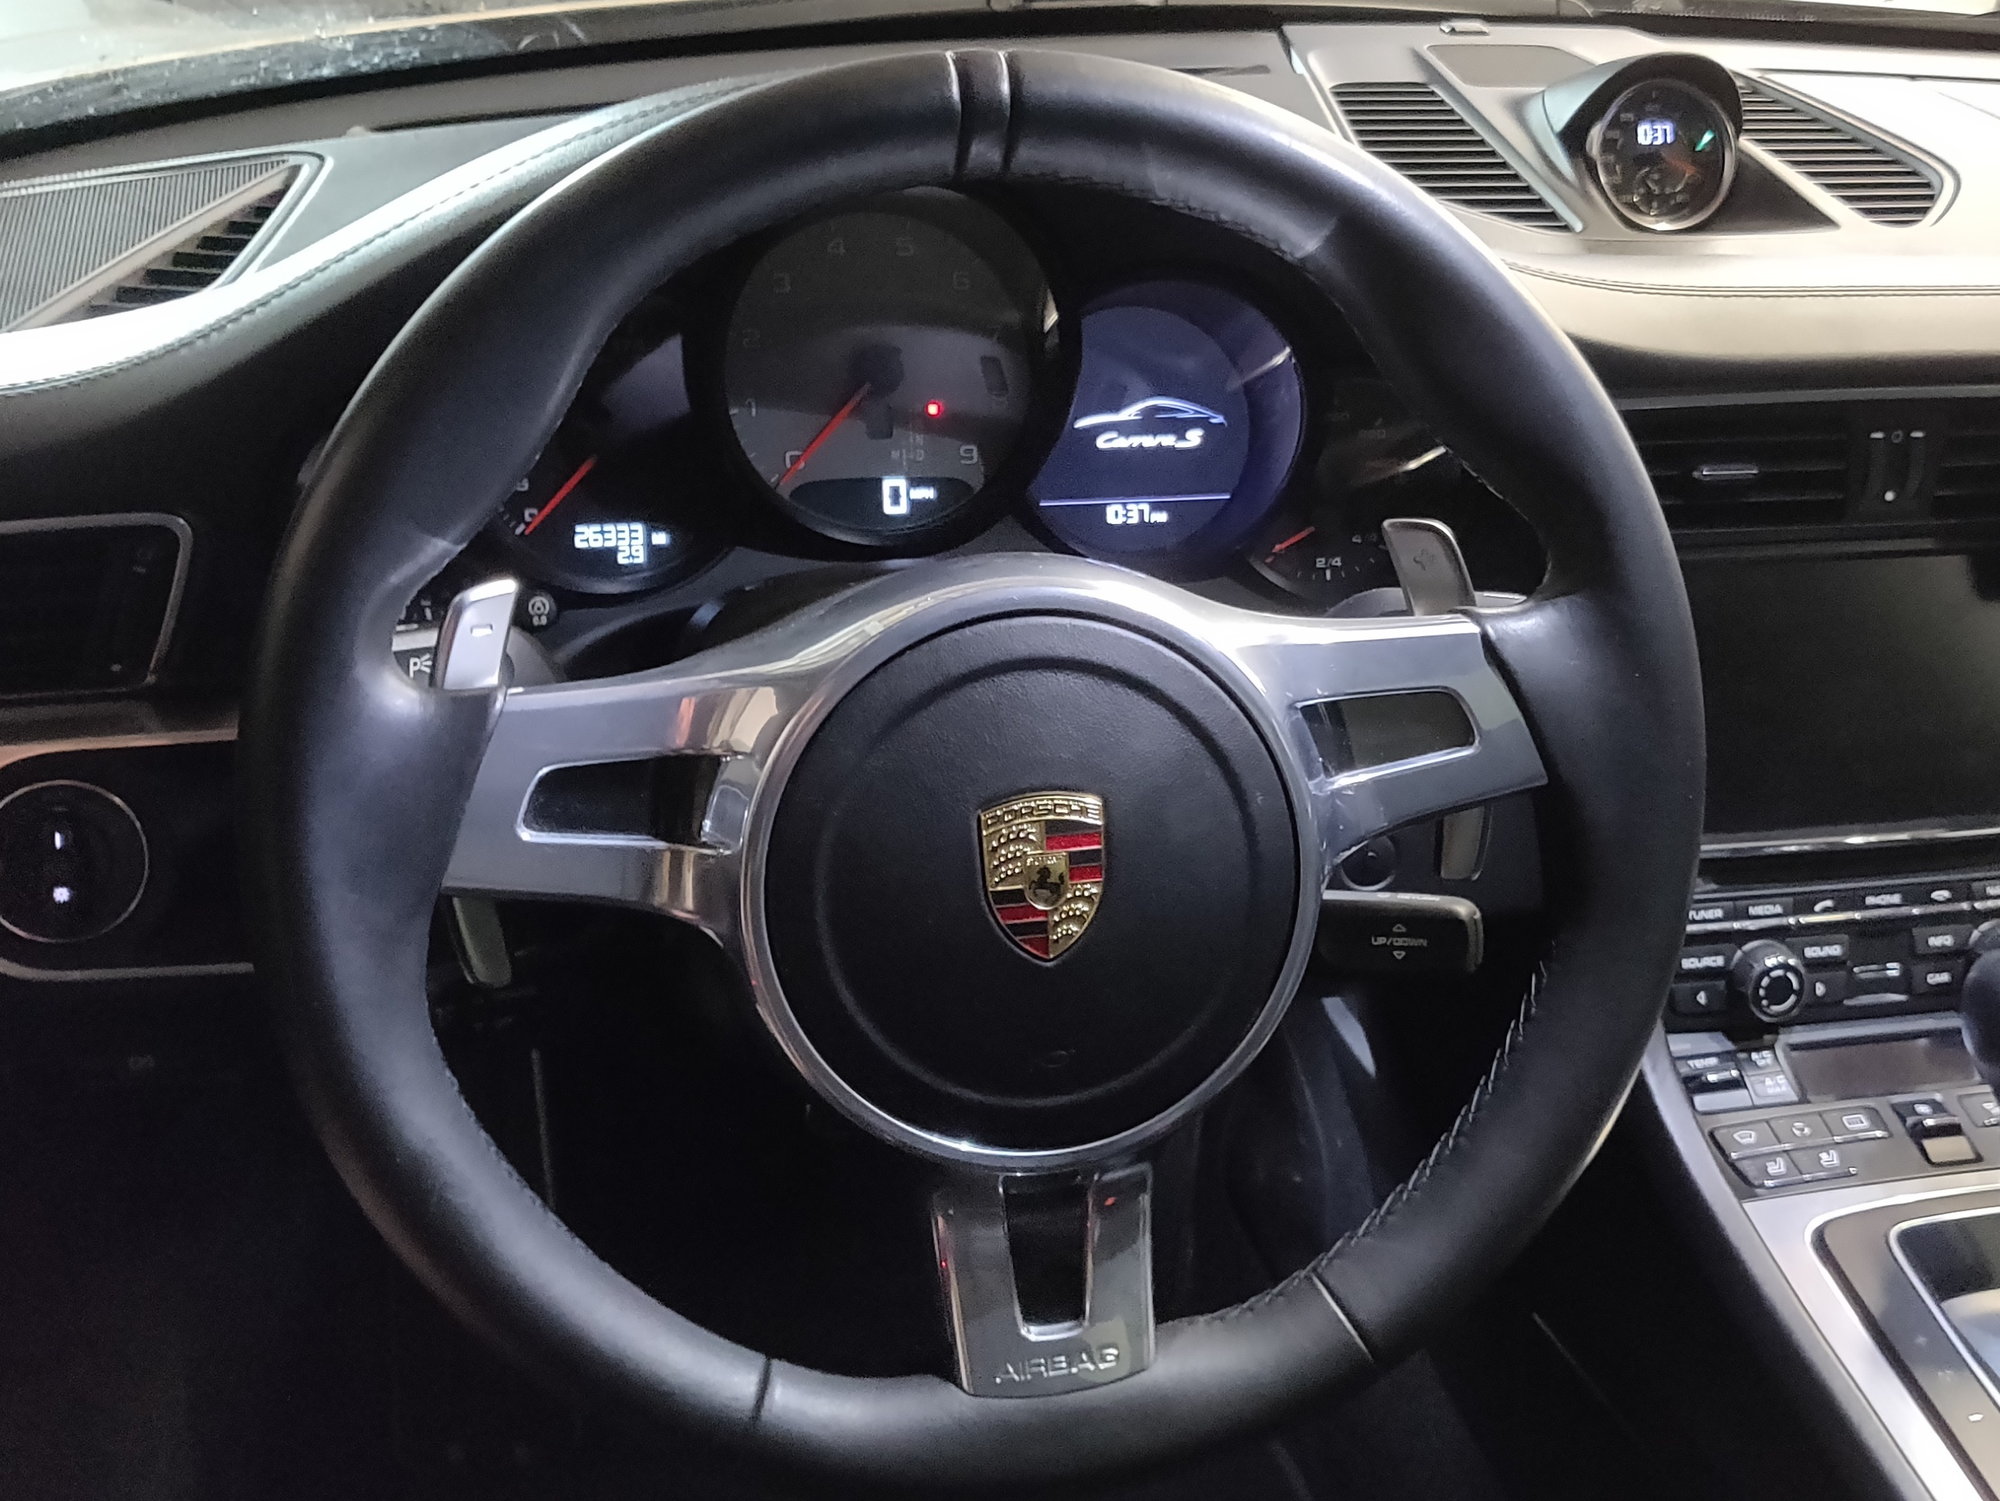 Interior/Upholstery - 2012 991.1 SportDesign Steering Wheel with PDK Paddles and Leather Airbag - Used - 2012 to 2016 Porsche Carrera - San Diego, CA 92126, United States